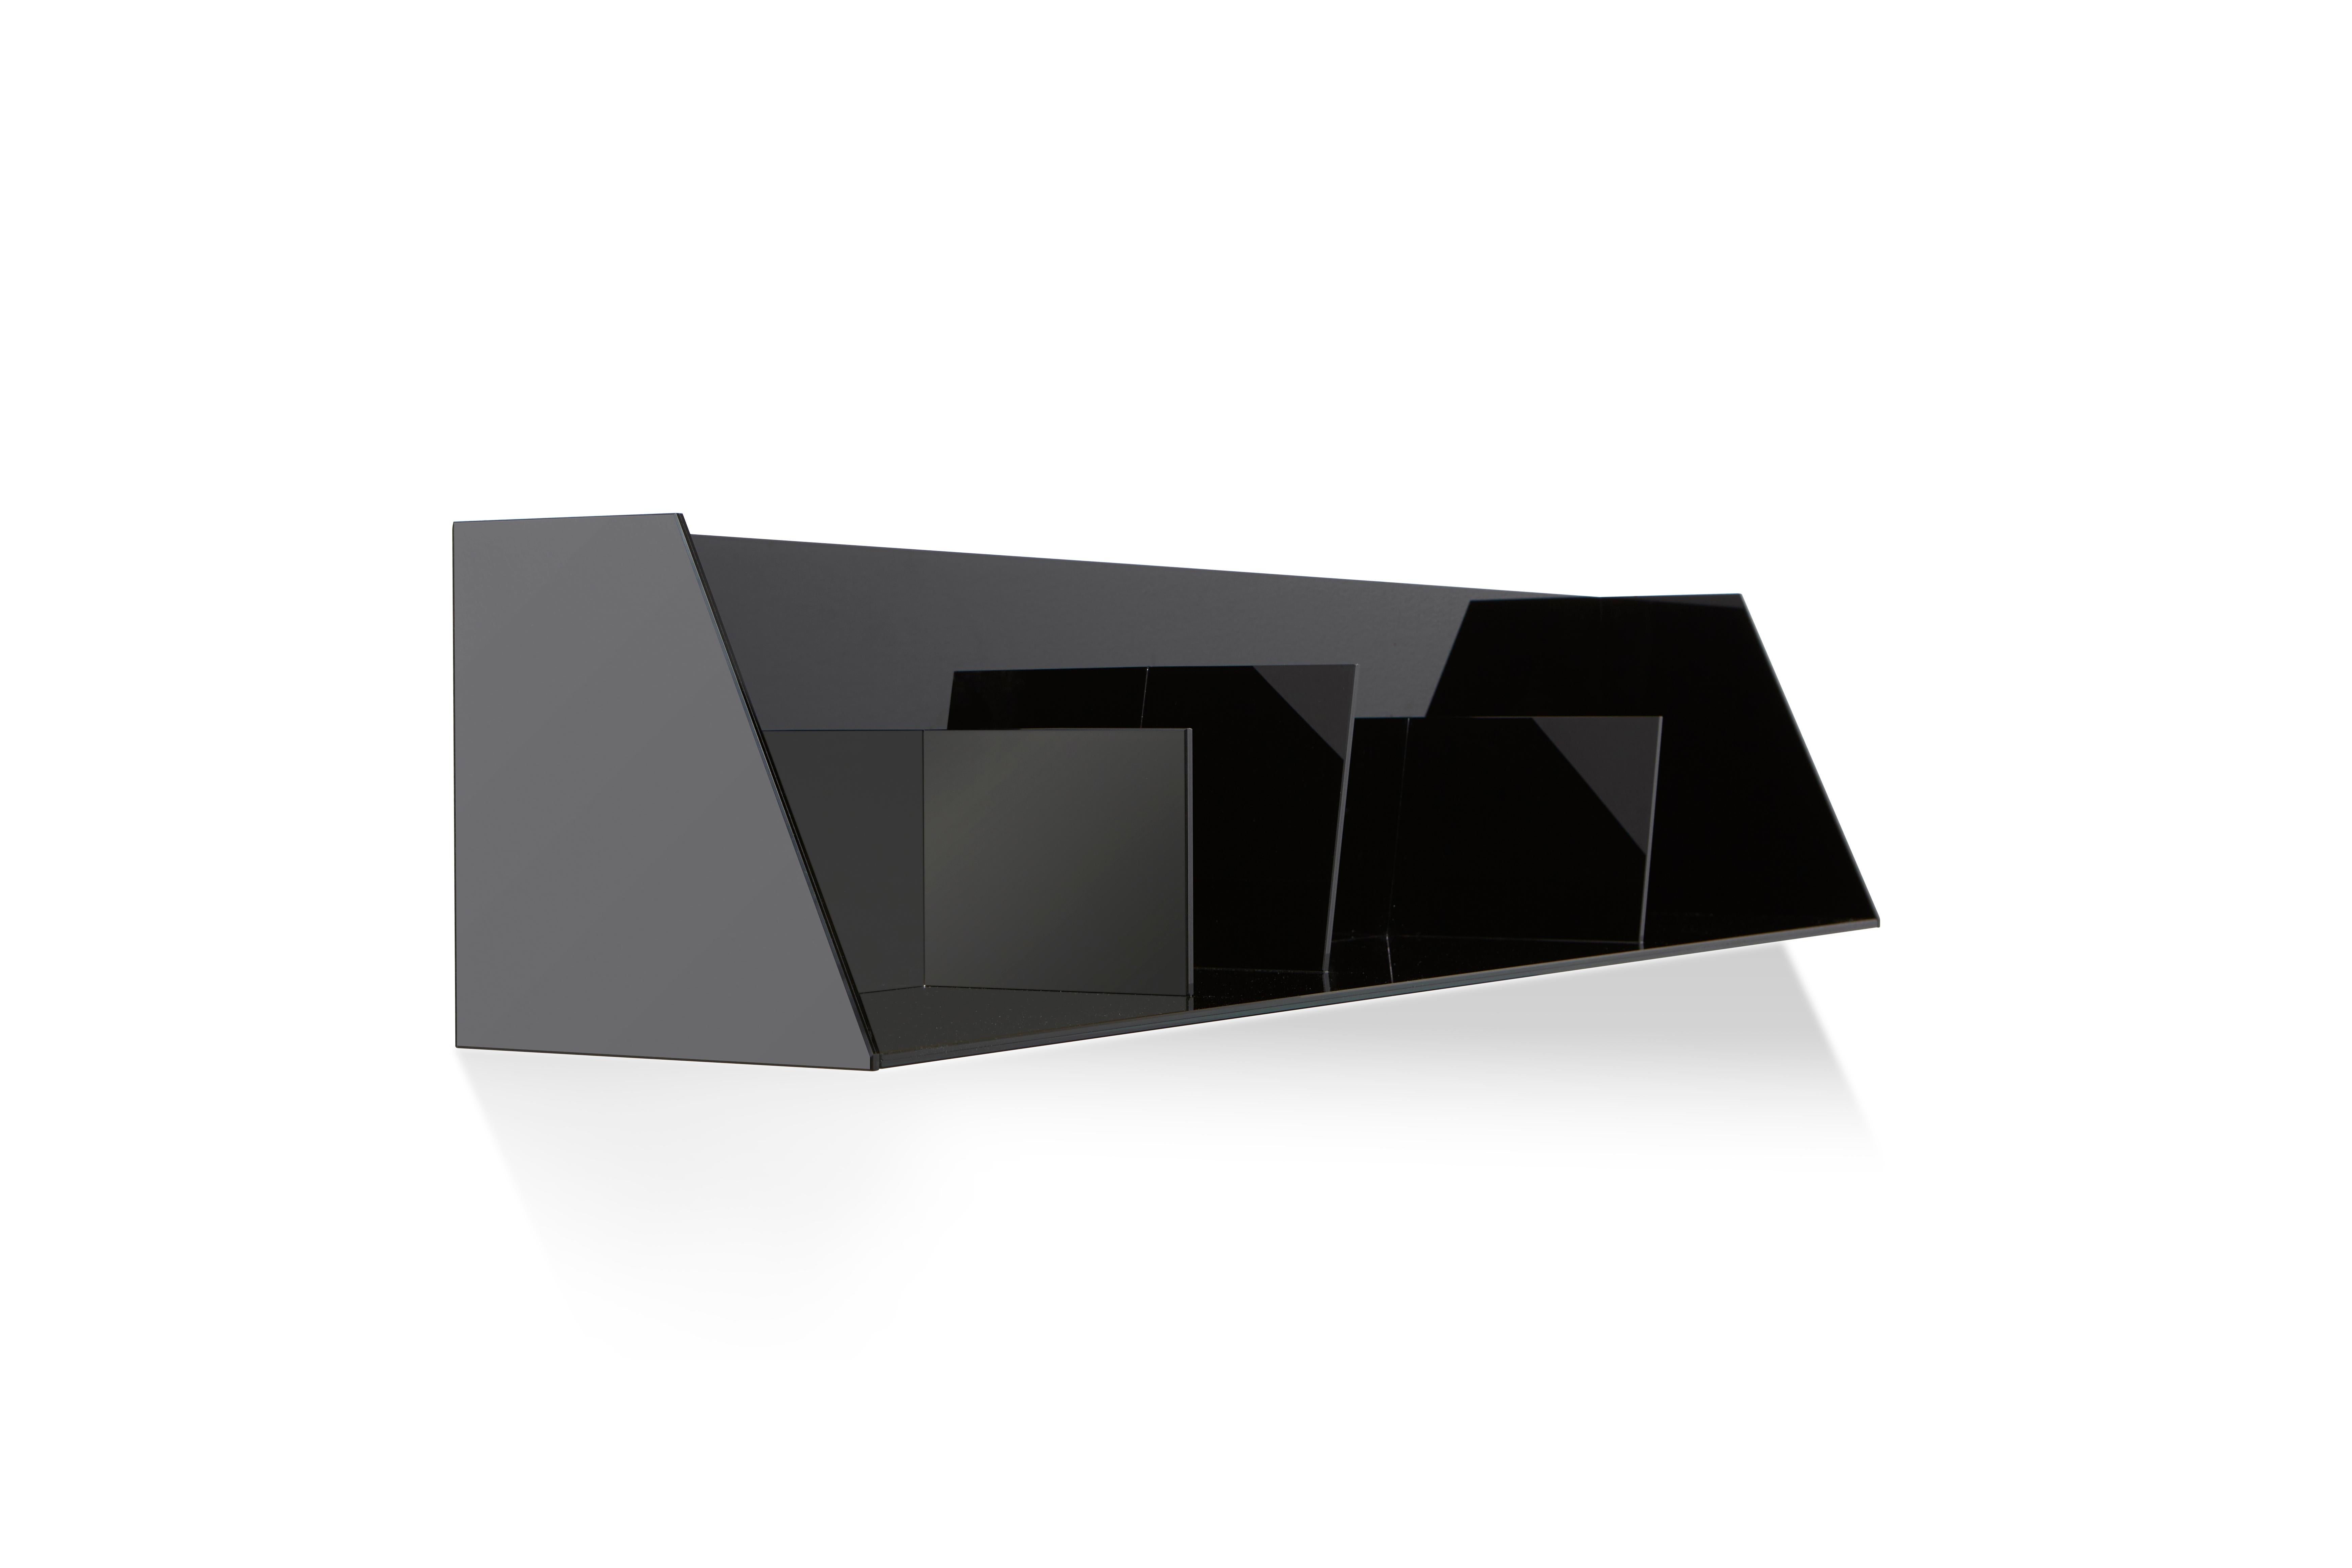 Corbel glass shelf by Mentemano
Dimensions: 116 x 42 x H 190.5 cm
Materials: Tempered glass

Mentemano is a design concept brand leading to a precise matter: is the “mente” (mind) leading the “mano” (hand) to create a piece of furniture or